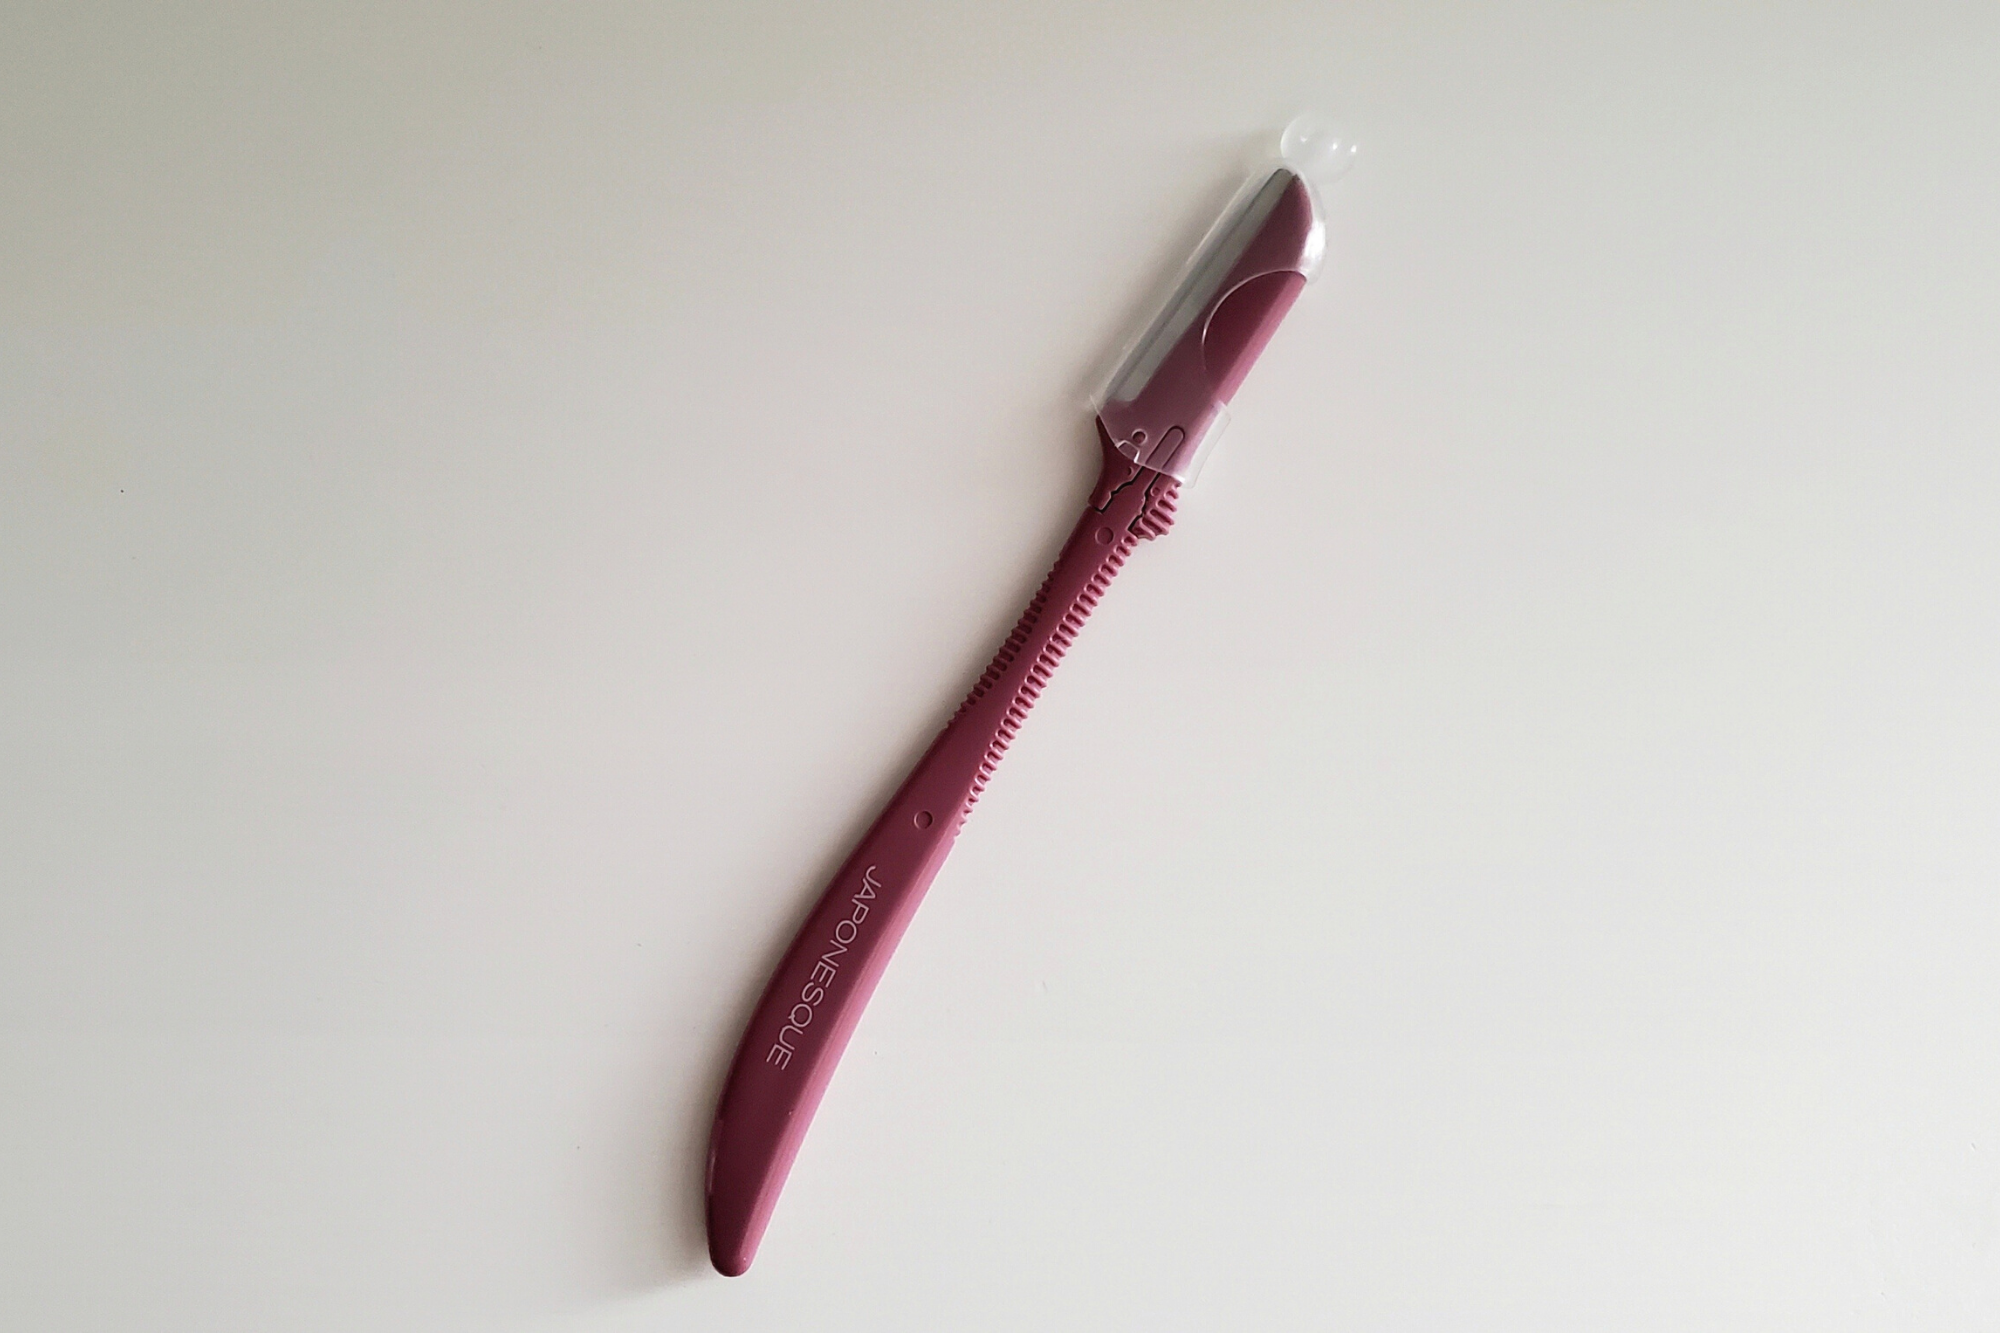 A small magenta handle with a single razor blade at the end with a safety cover over it. It reads "Japonesque" on the side.